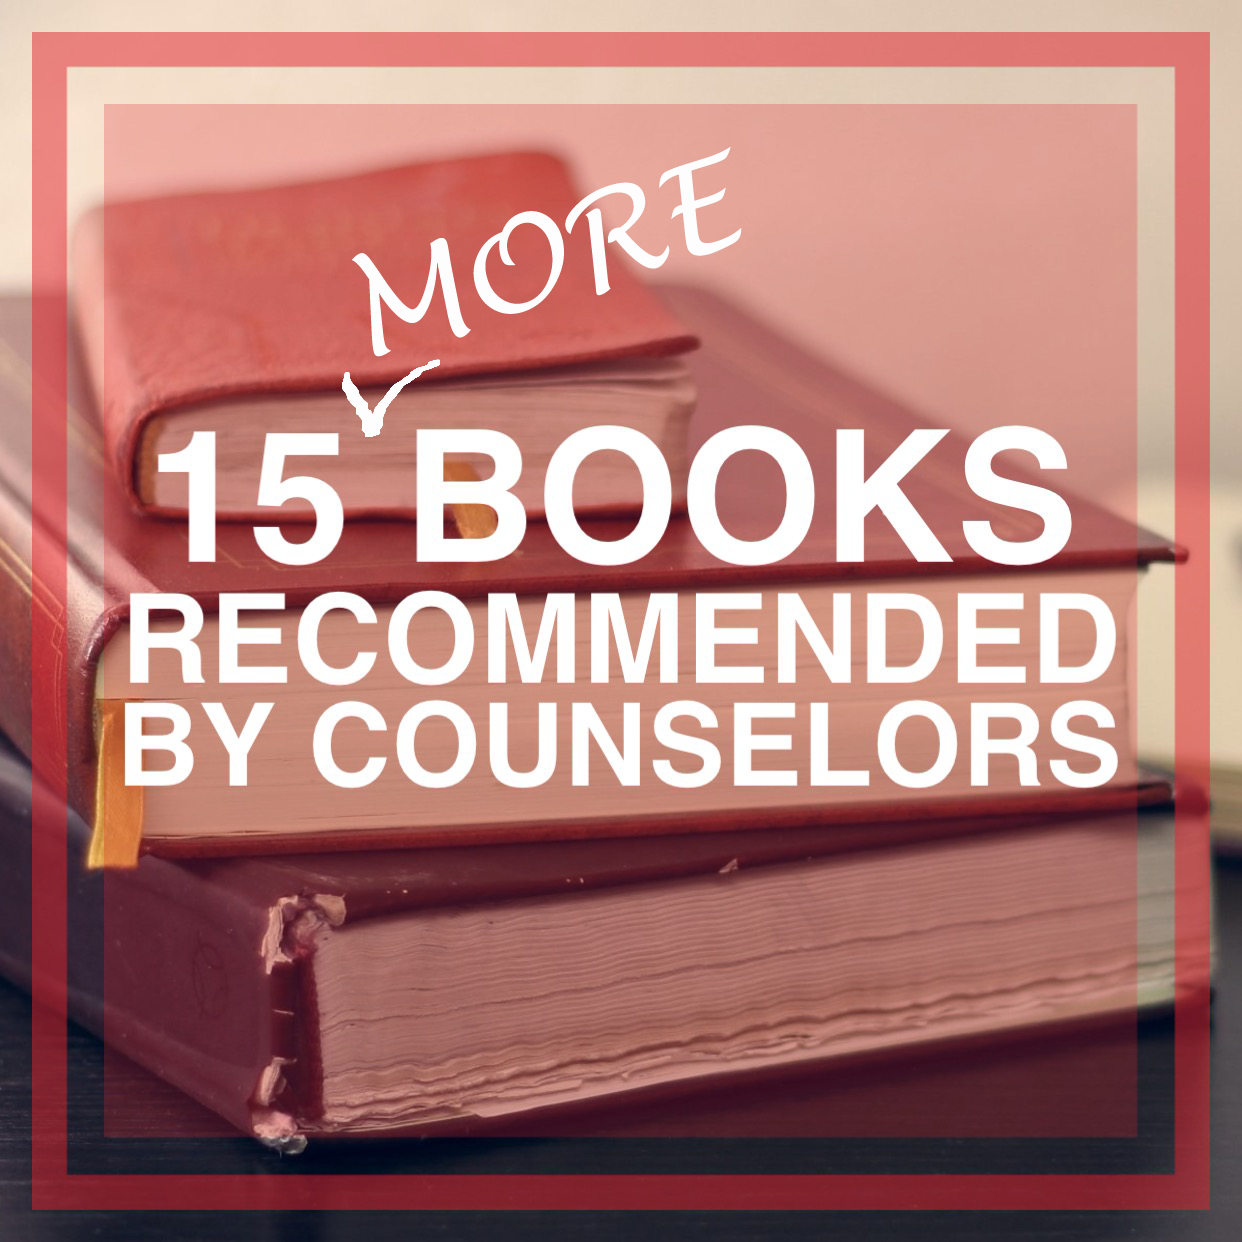 15 MORE Books Recommended By Counselors